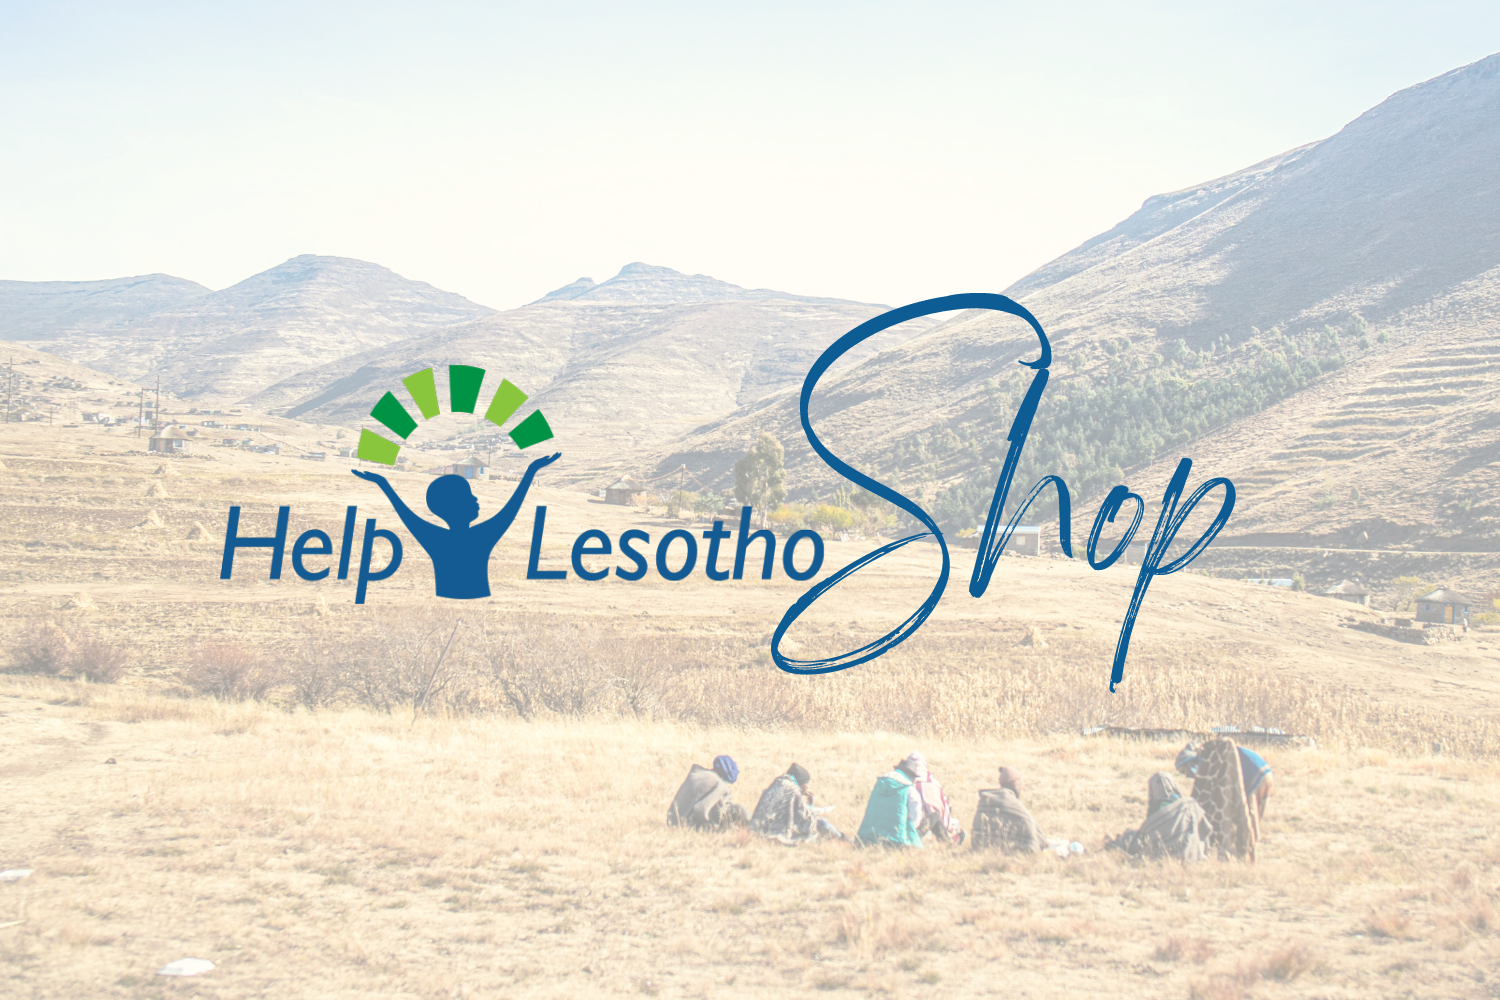 Image of mountains in Lesotho with group of people in outdoor workshop. Text overlay says Help Lesotho Shop. 